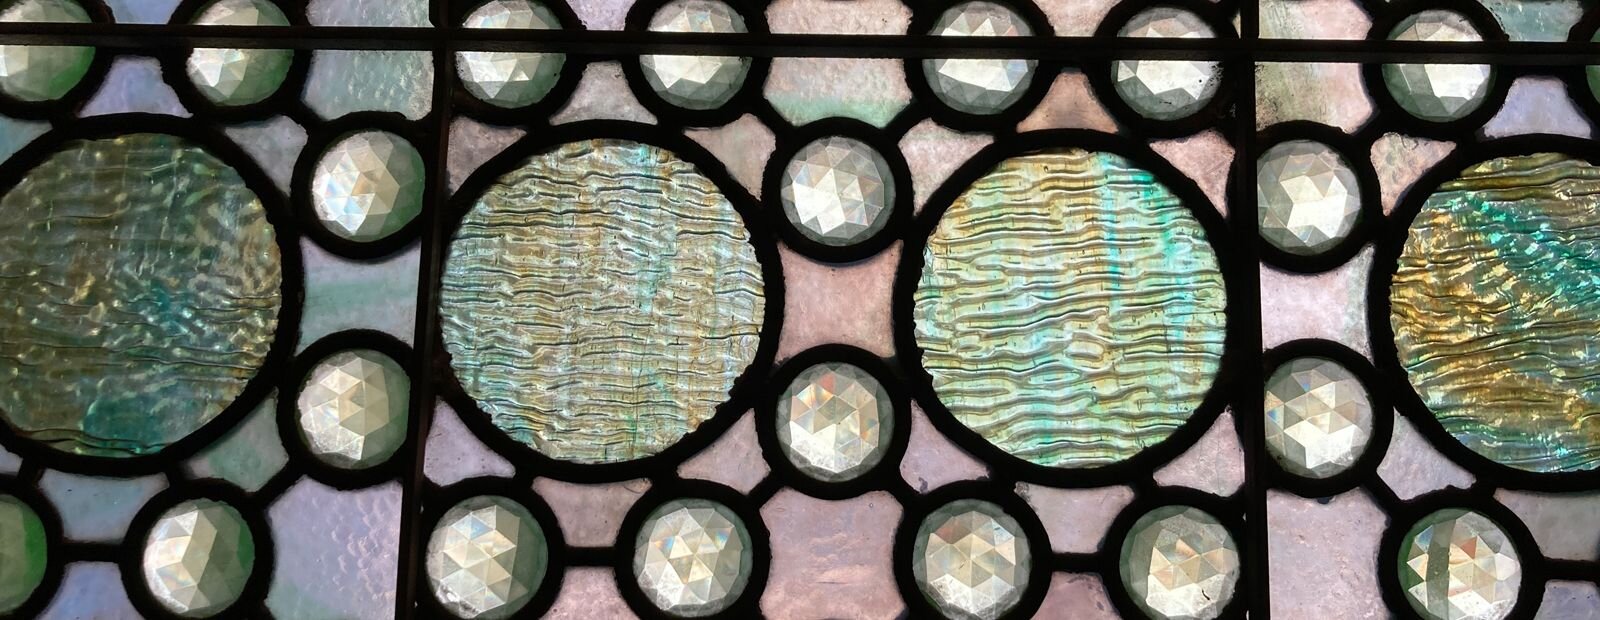 Imperial green glass window designed by Jessie May Livermore at the Sandusky Library